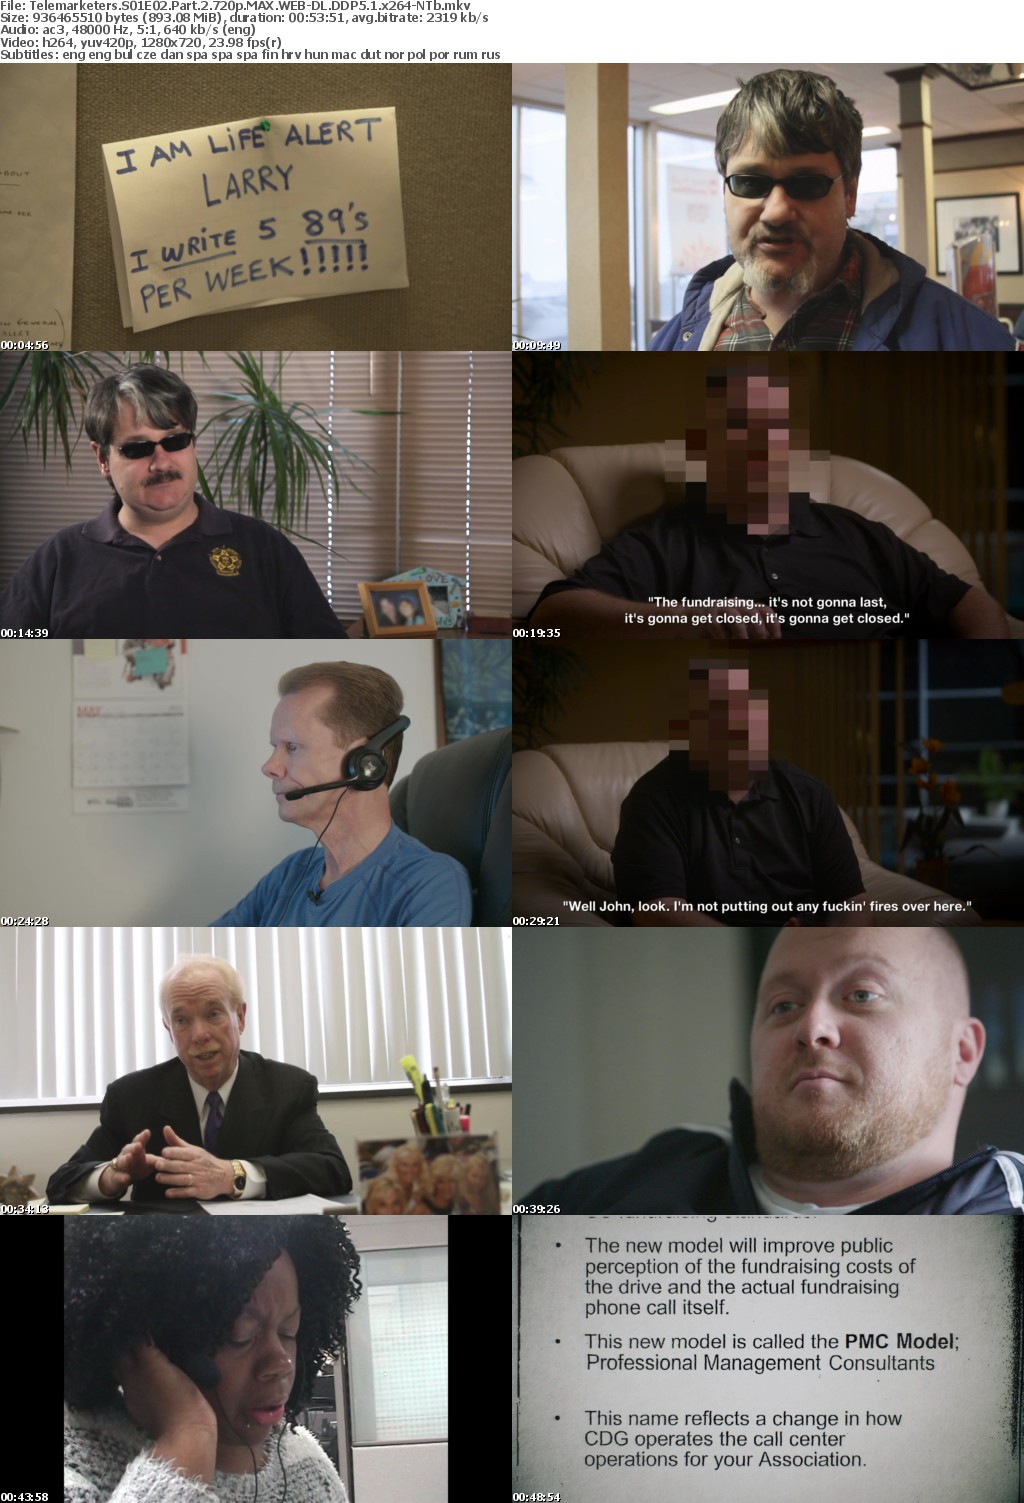 Telemarketers S01E02 Part 2 720p MAX WEB-DL DDP5 1 x264-NTb